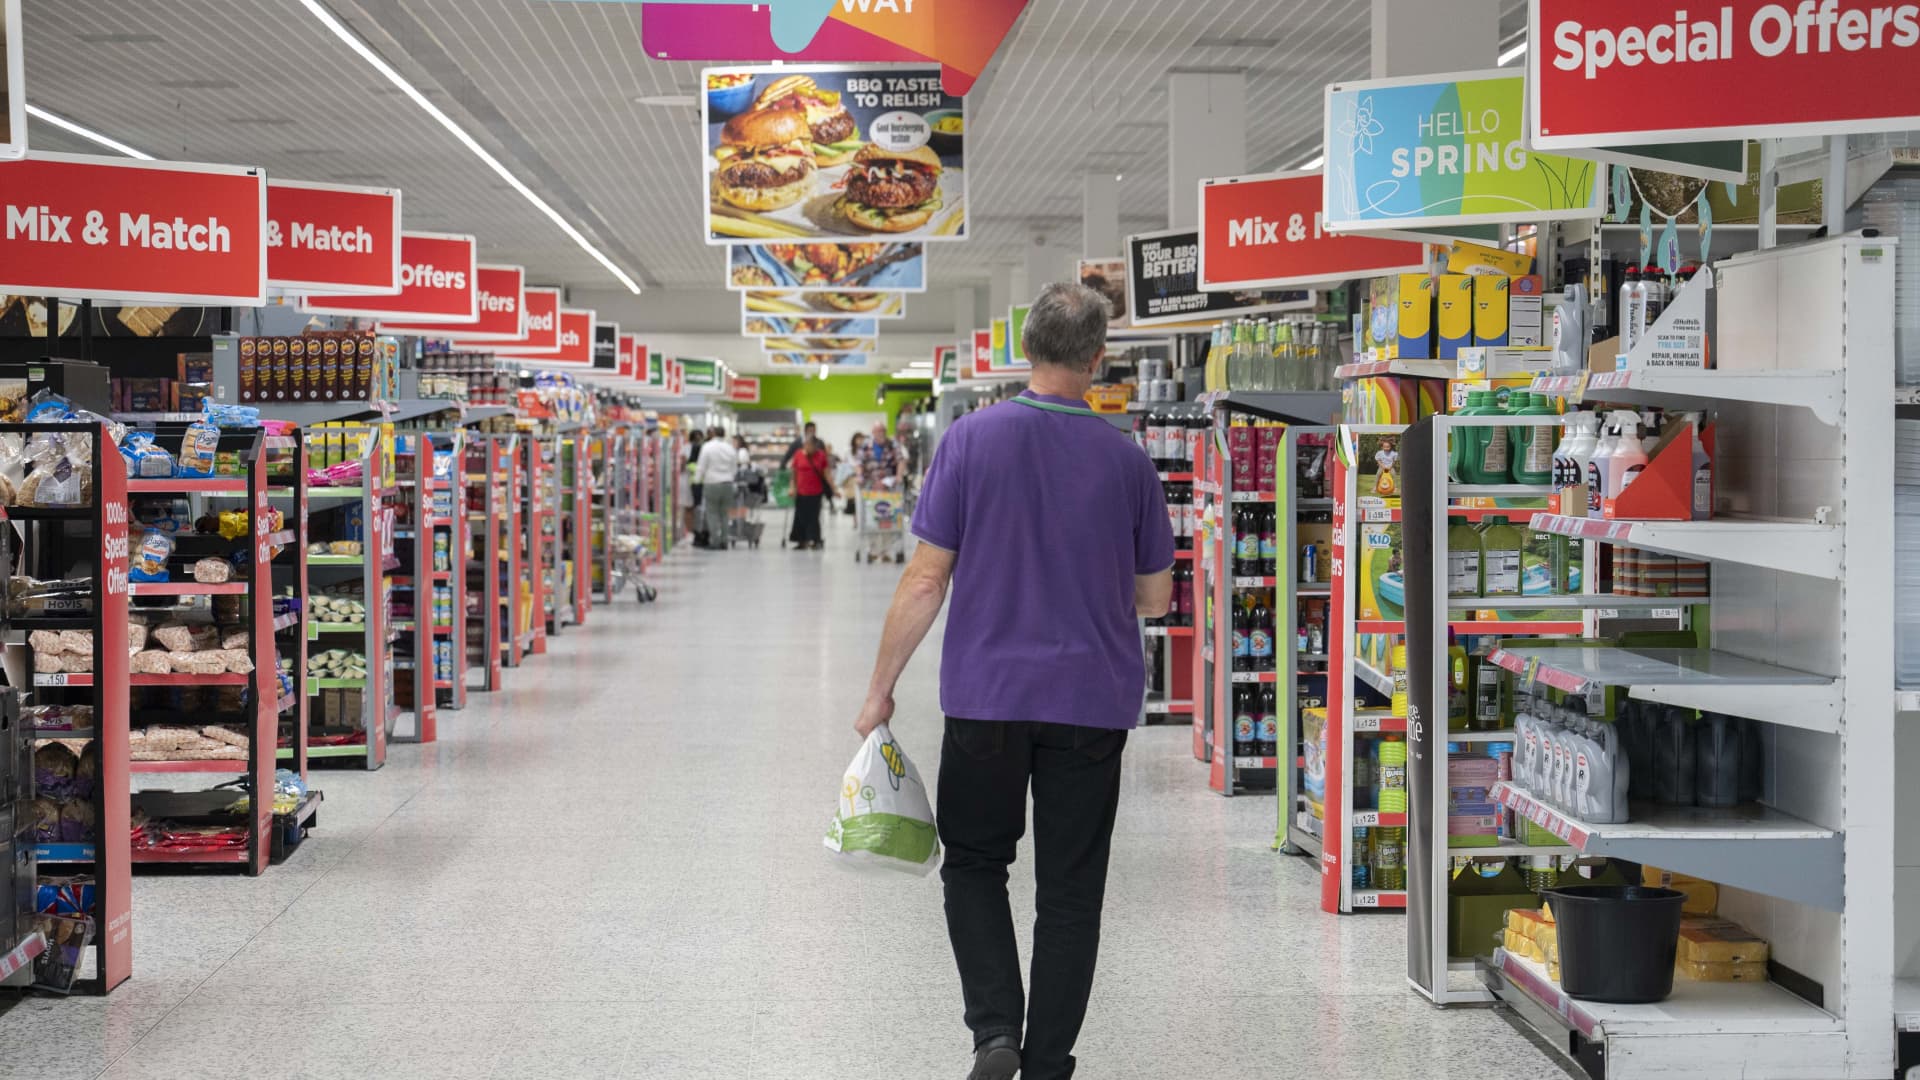 A person shops at a supermarket in London, United Kingdom.